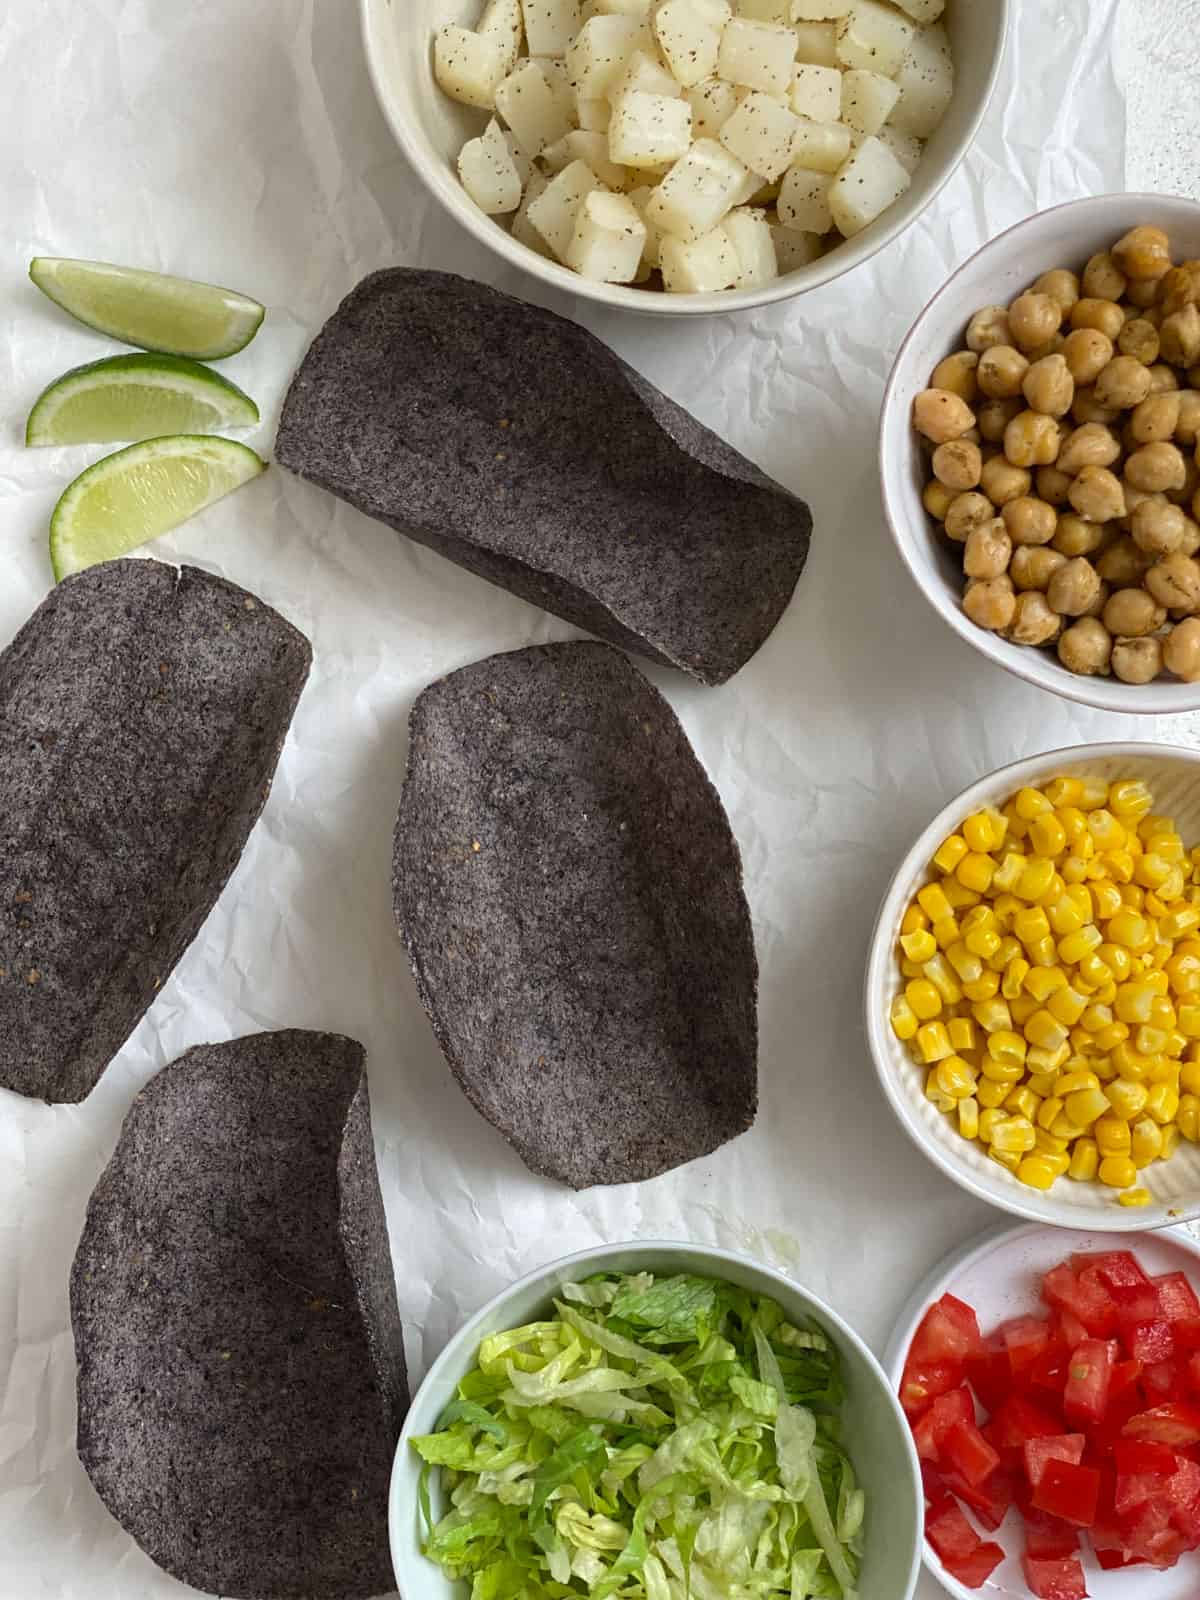 ingredients for Potato and Chickpea Tacos measured out against a light surface